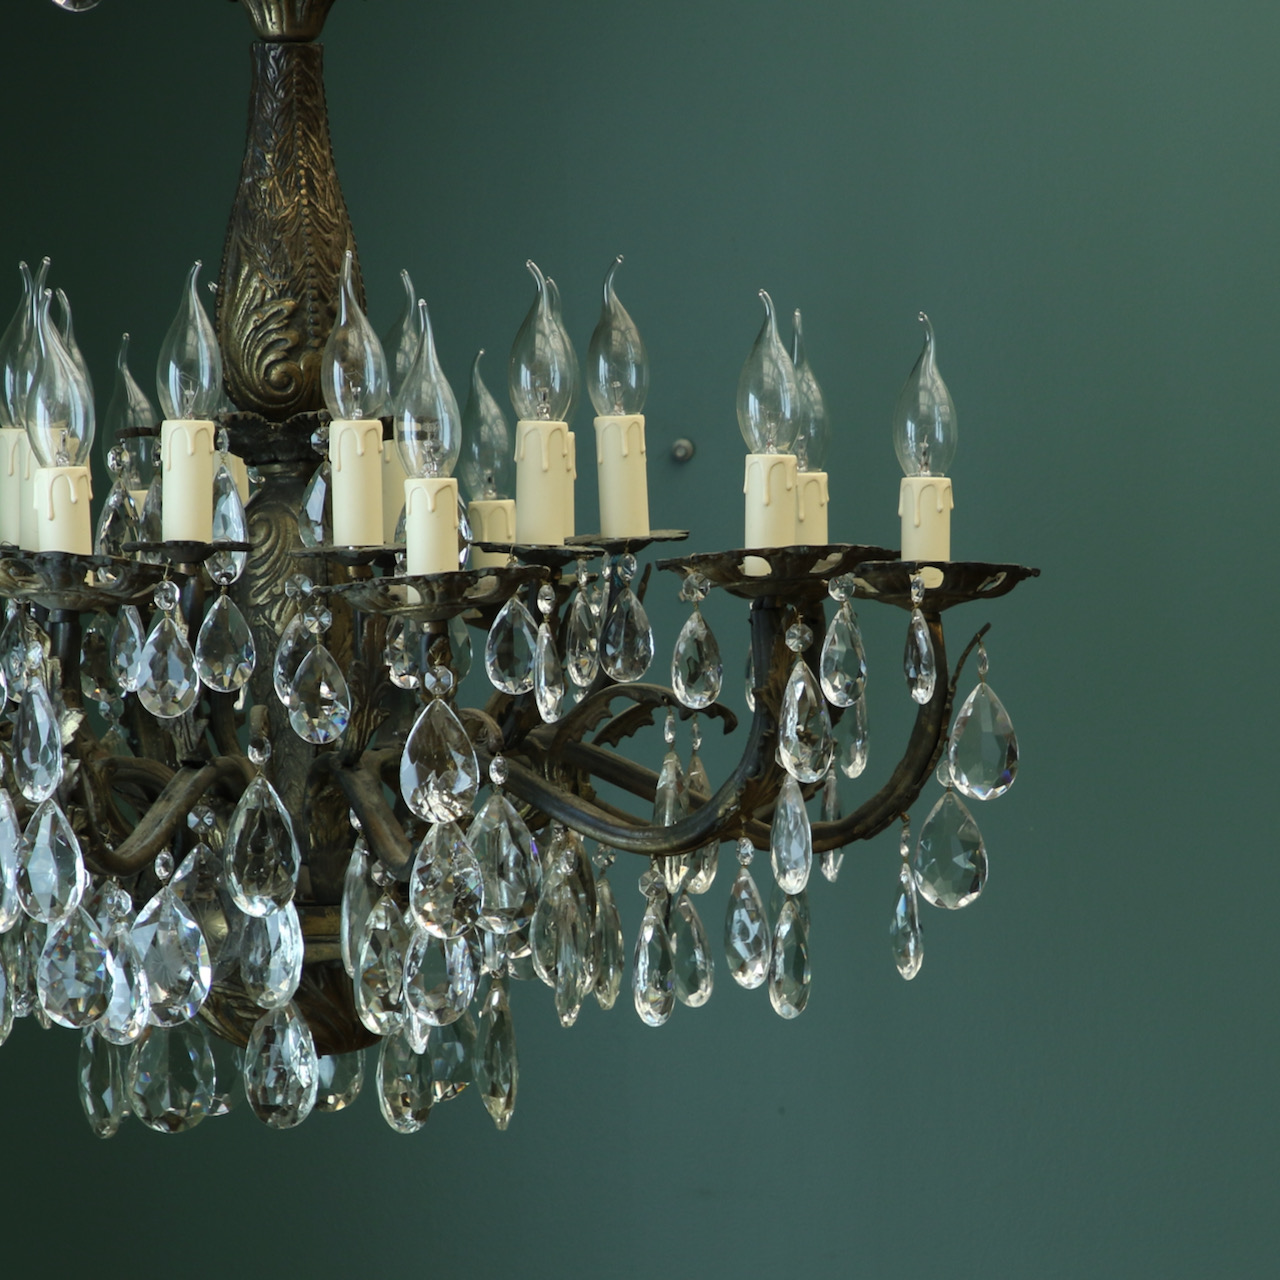 A European Chandelier with 20 lights